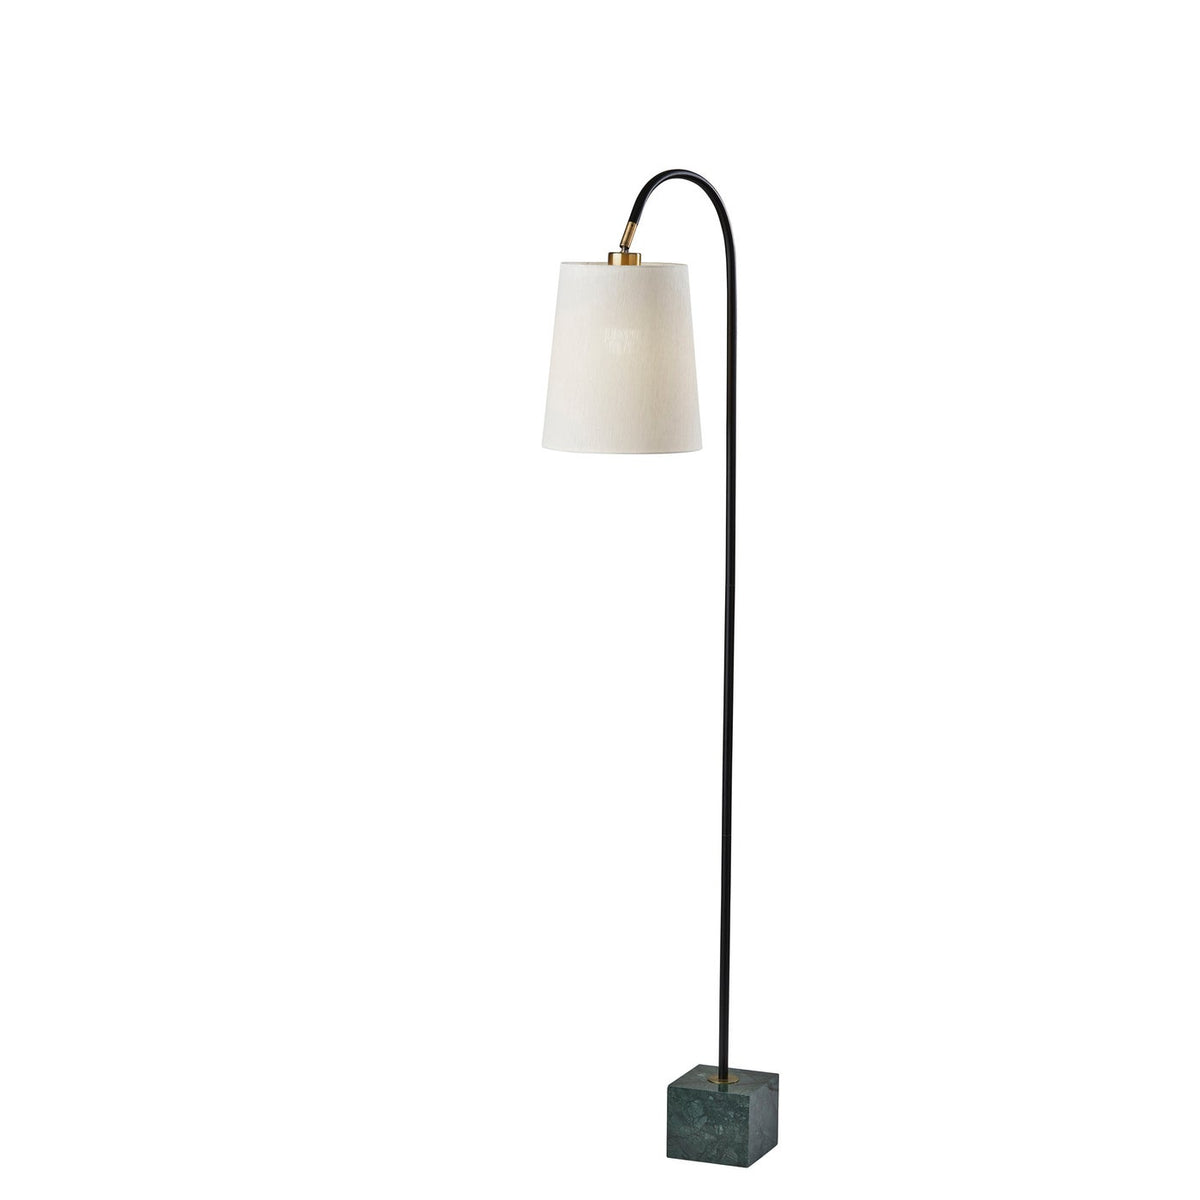 Adesso Home - 3399-01 - Floor Lamp - Hanover - Black W. Antique Brass Accent